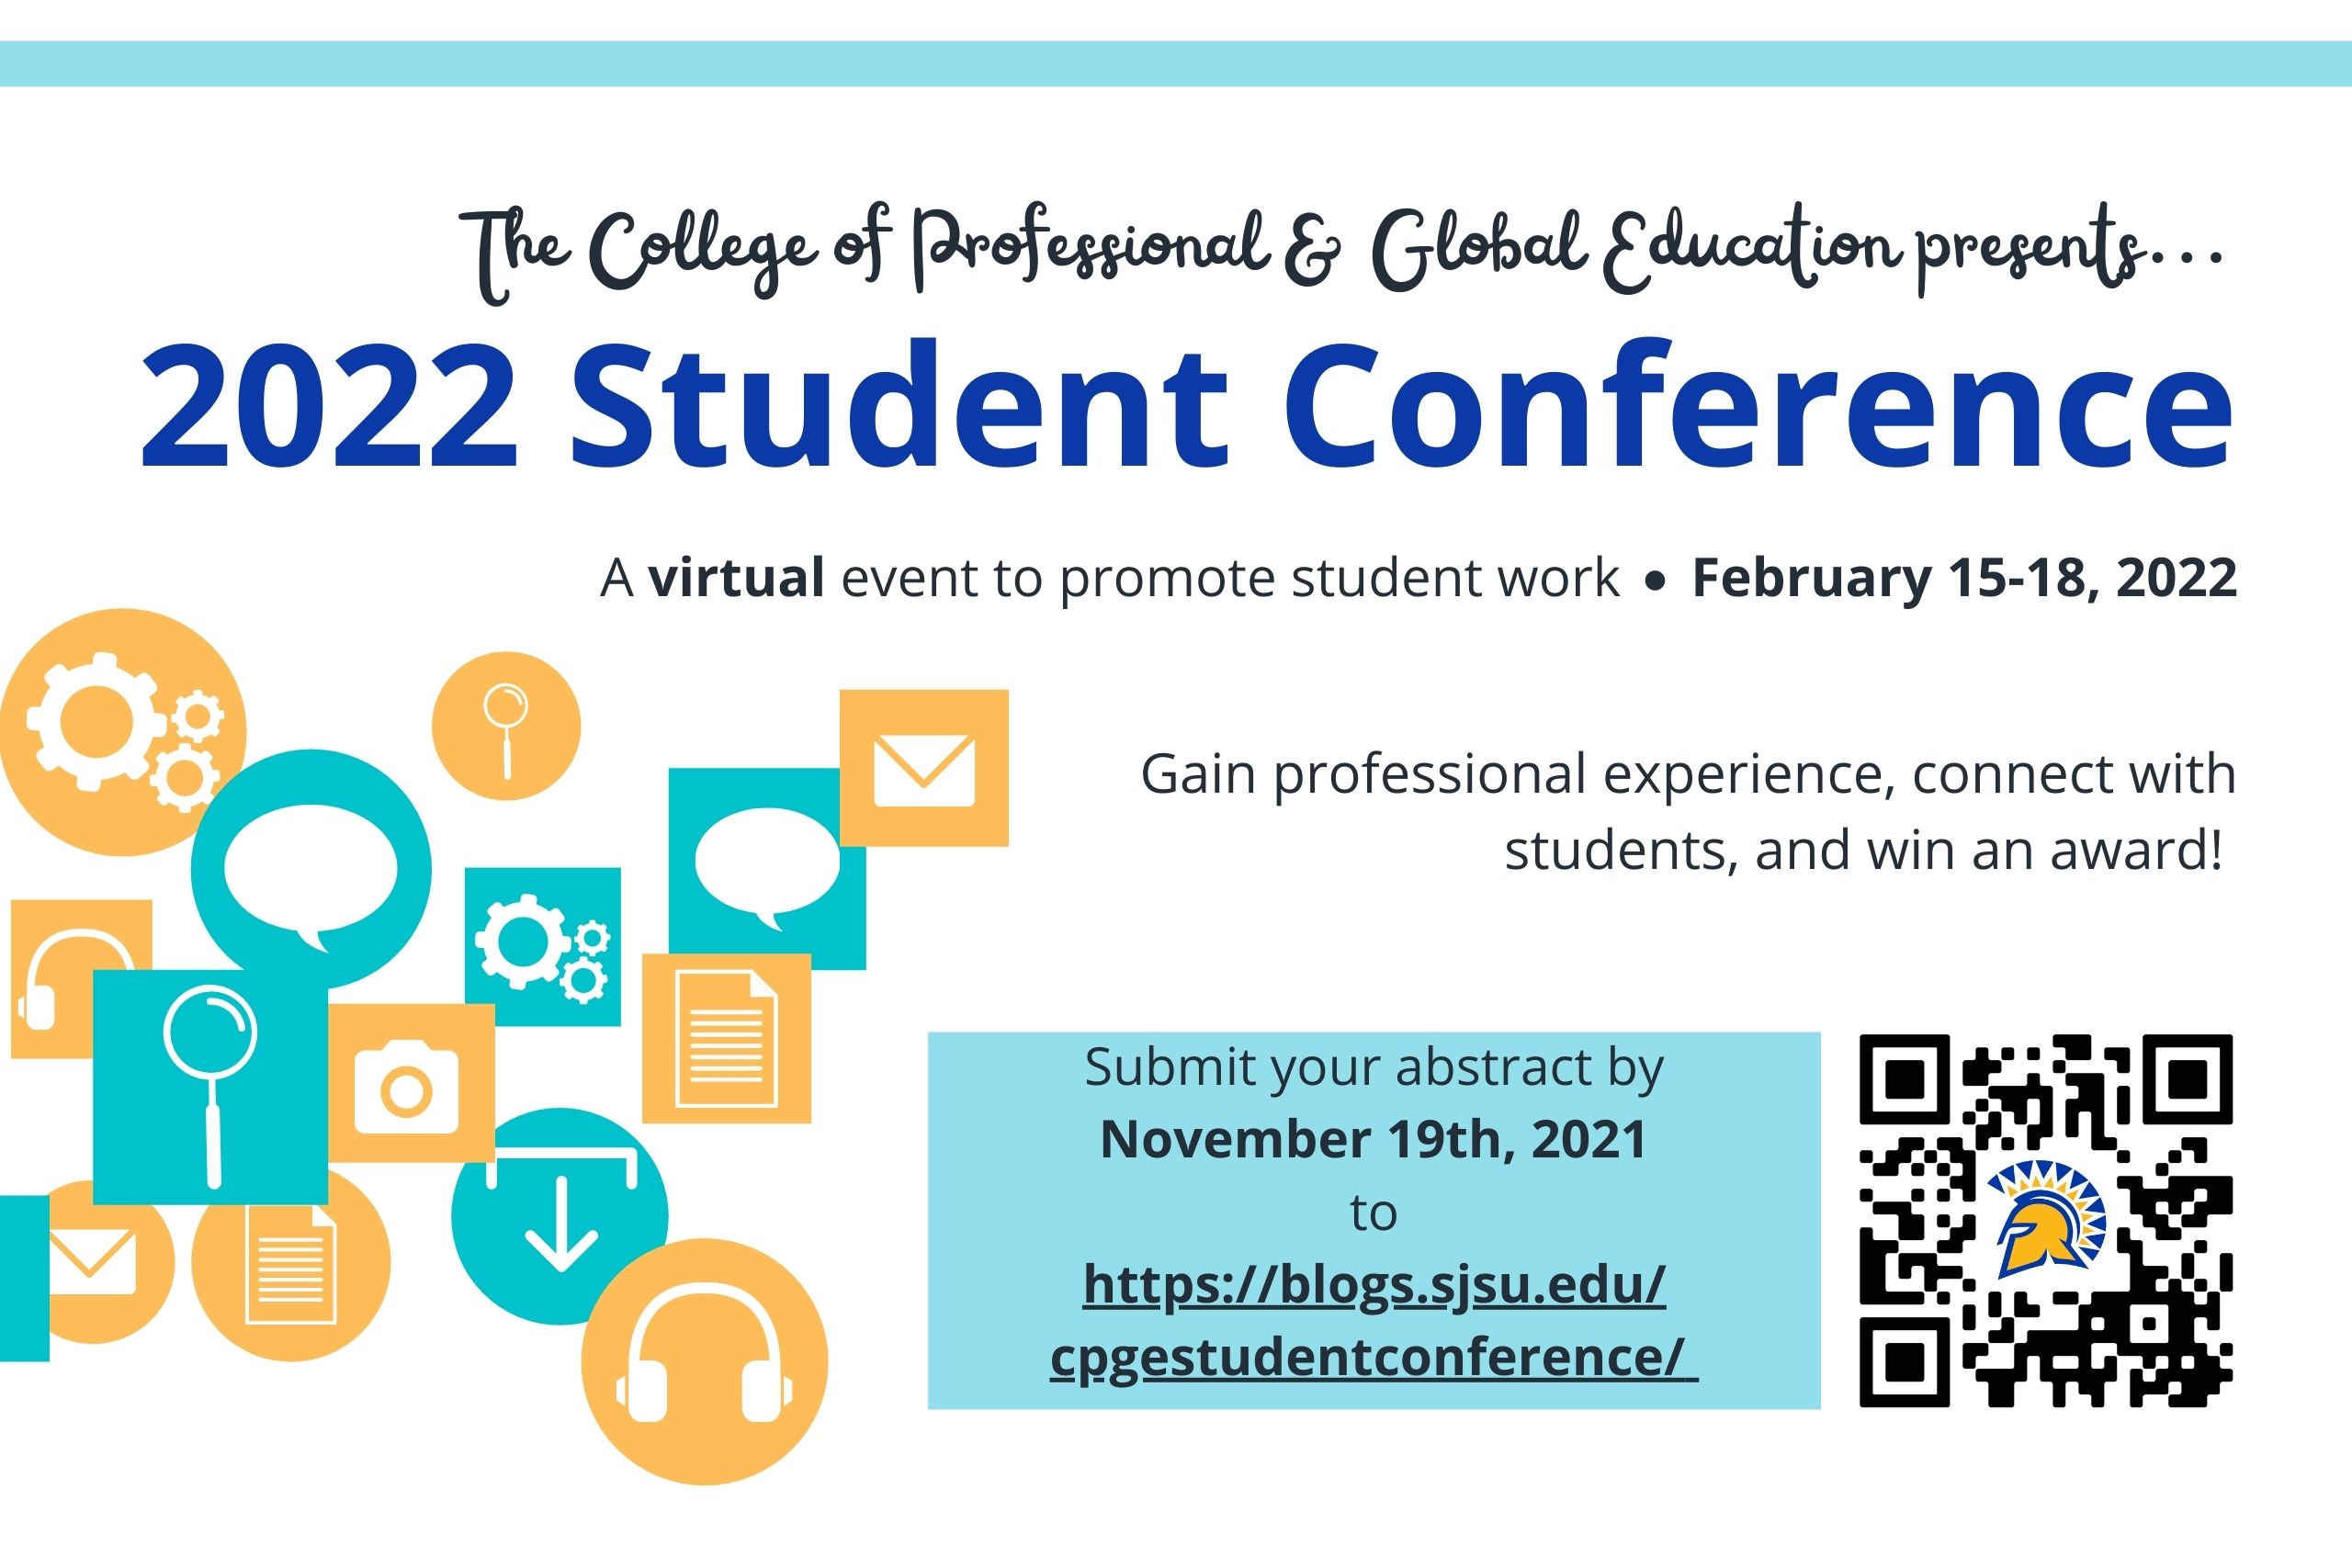 2022 Student Conference February 15-18, 2022